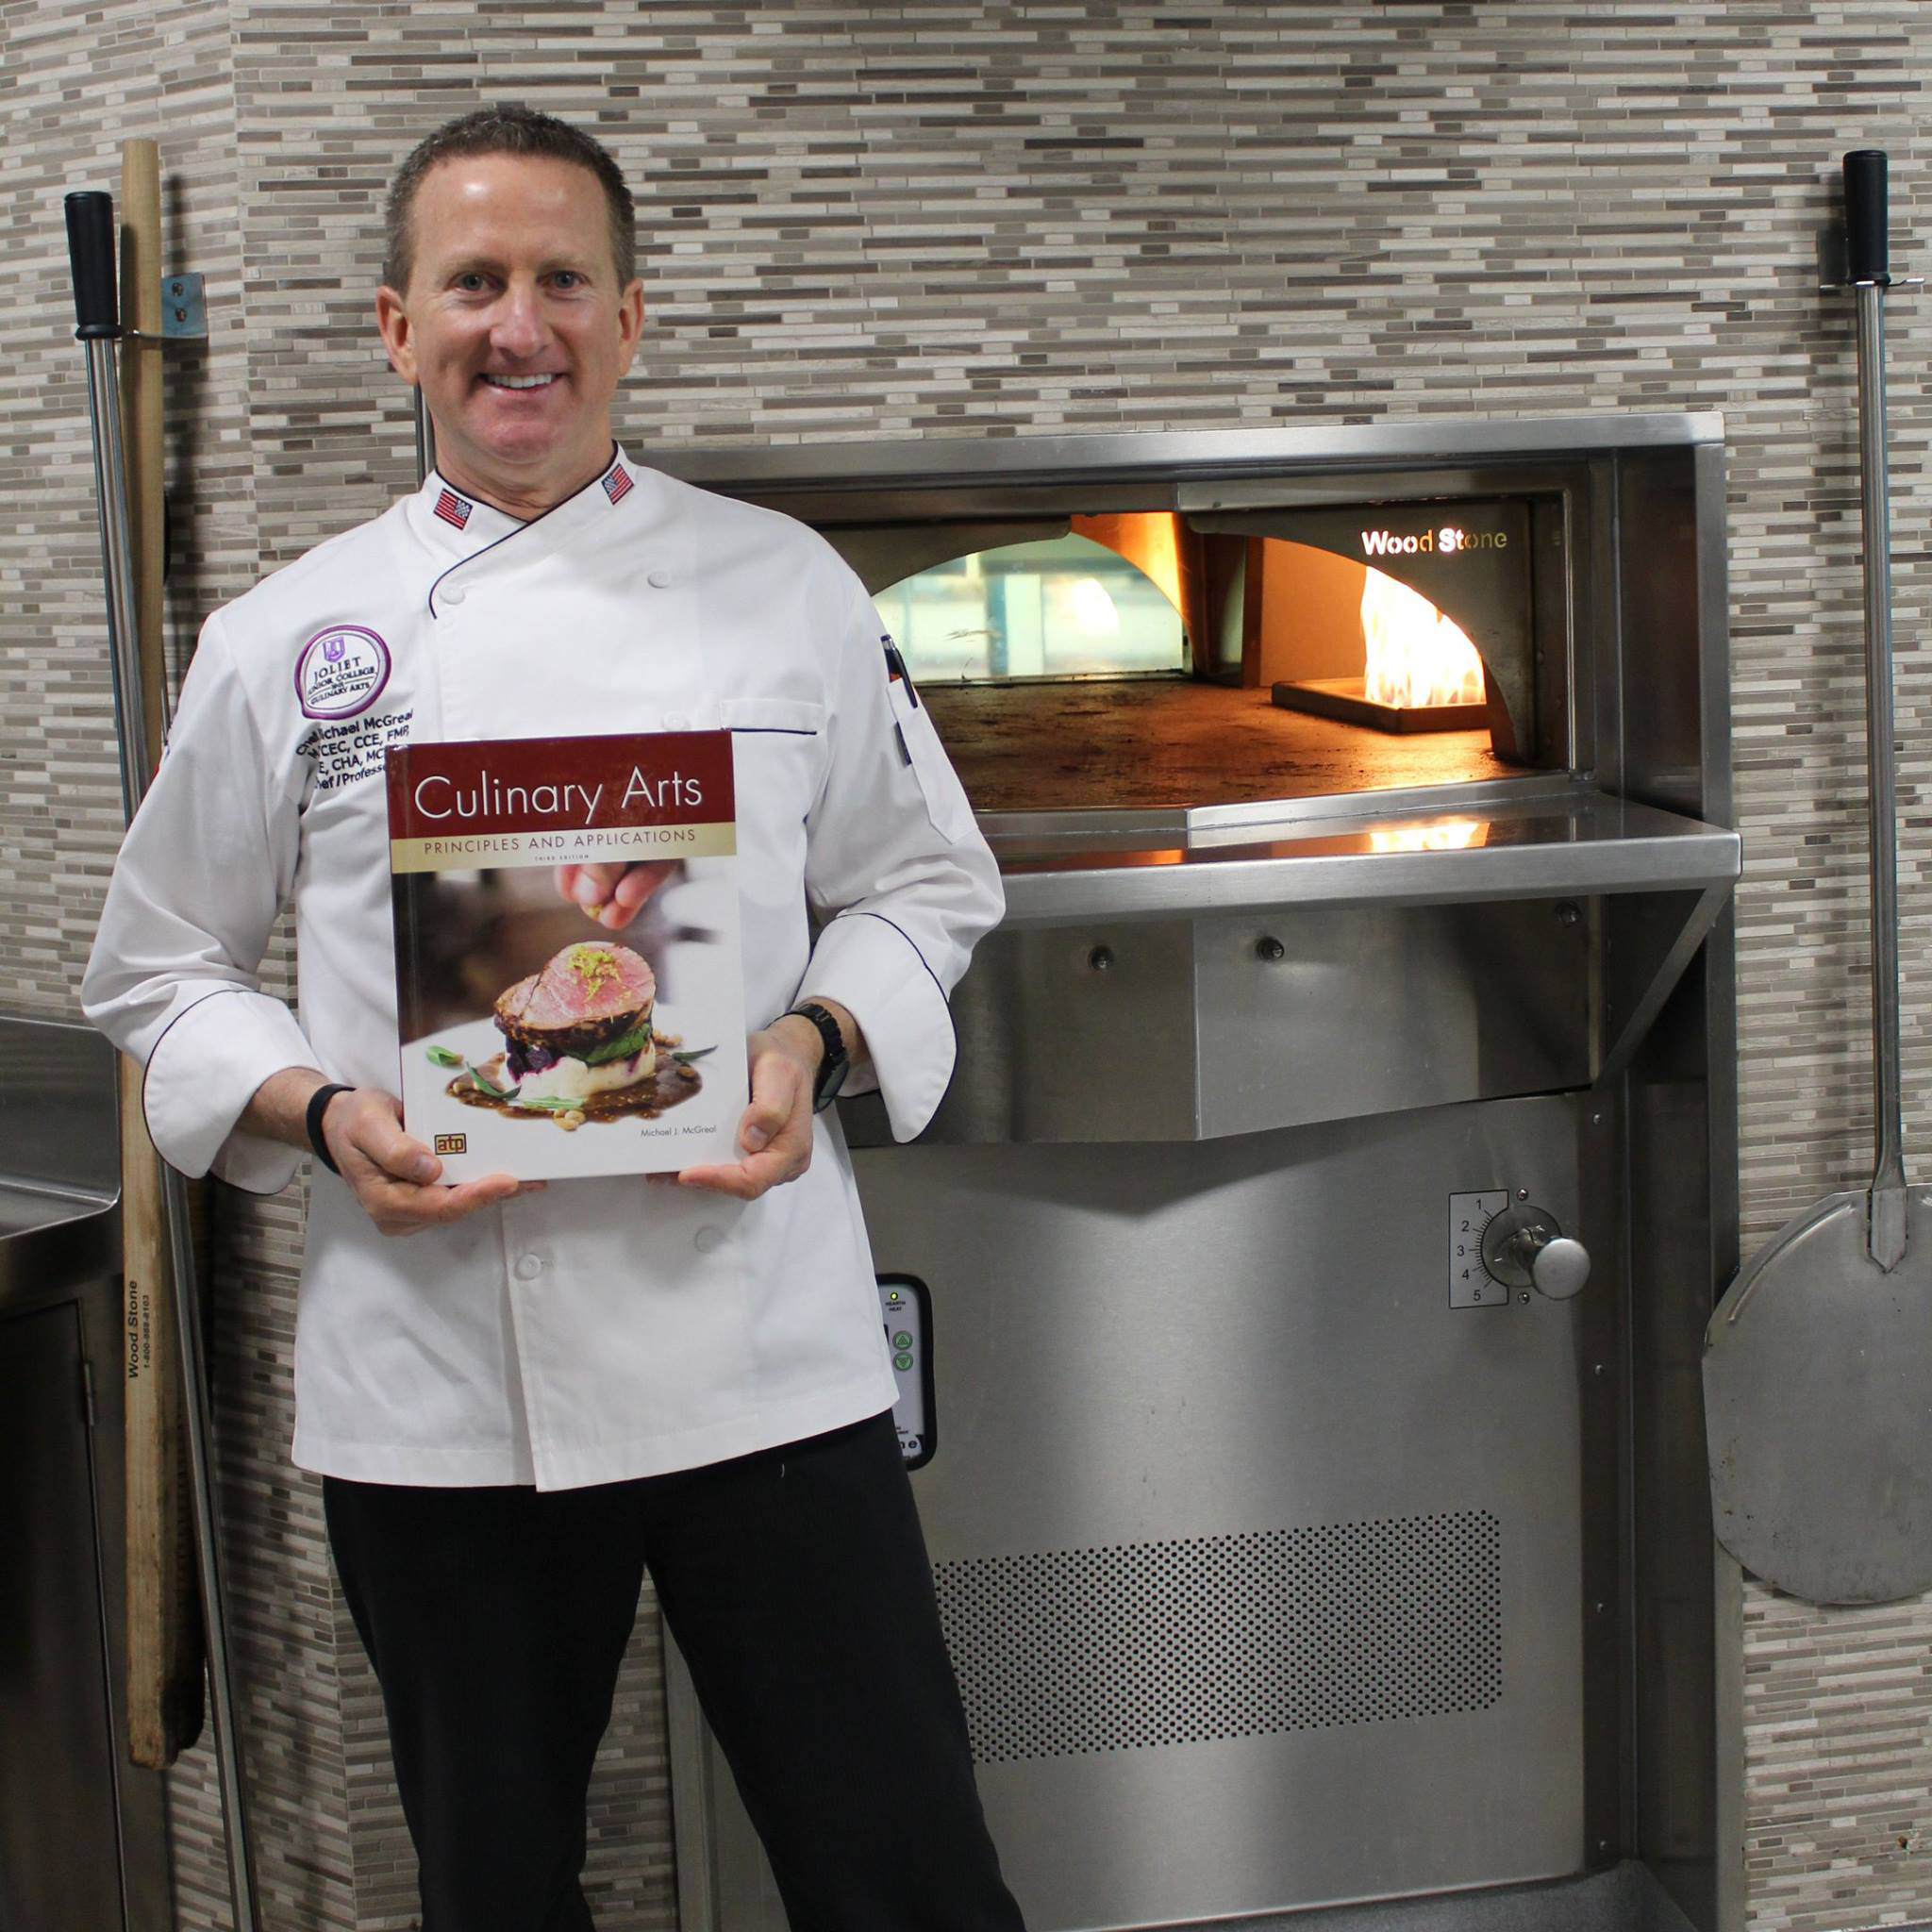 Chef Mike McGreal holding a copy of his textbook, "Culinary Arts Principles and Applications."